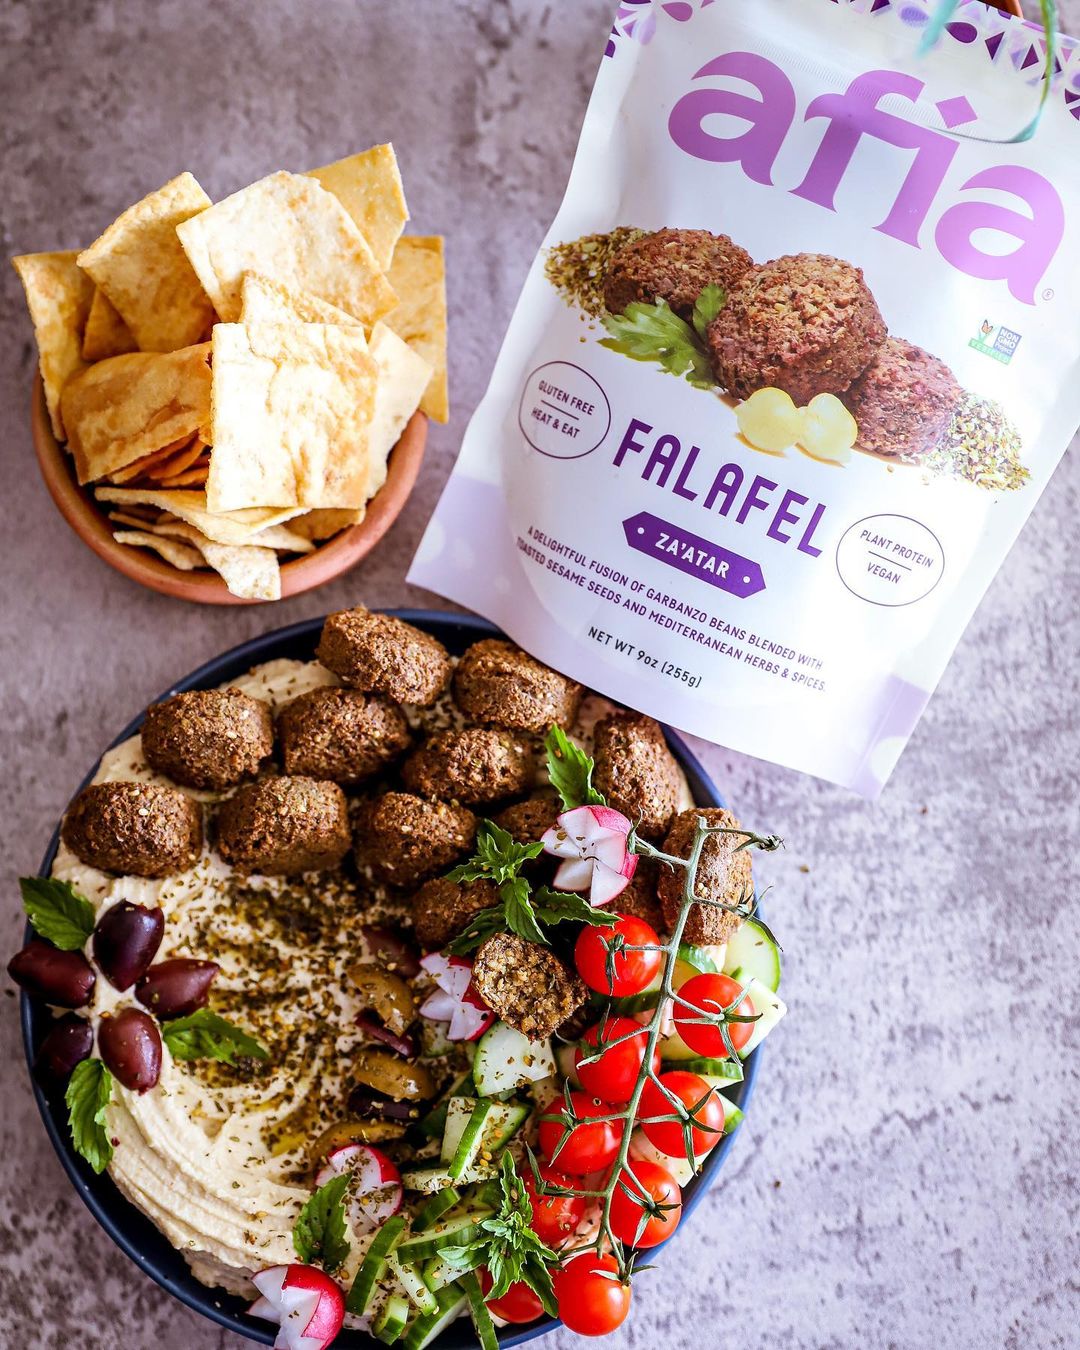 Bag of falafel from Afia Foods with food on table